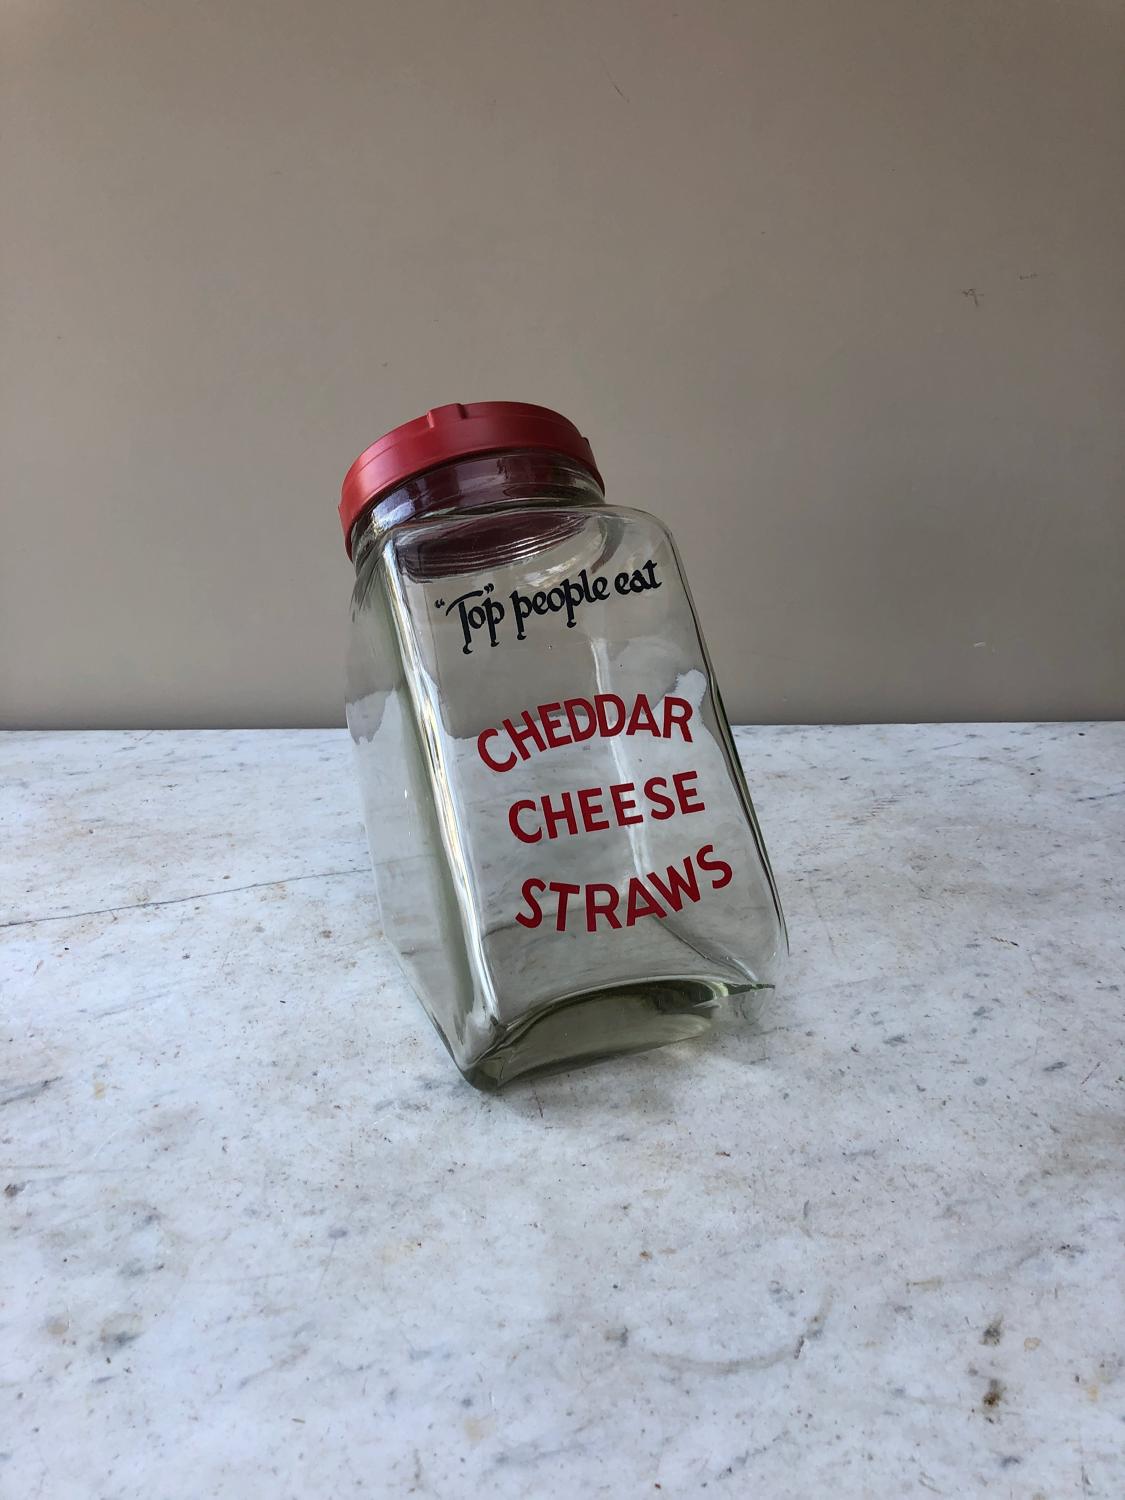 1940s Shops Glass Counter Top Advertising Jar - Cheddar Cheese Straws